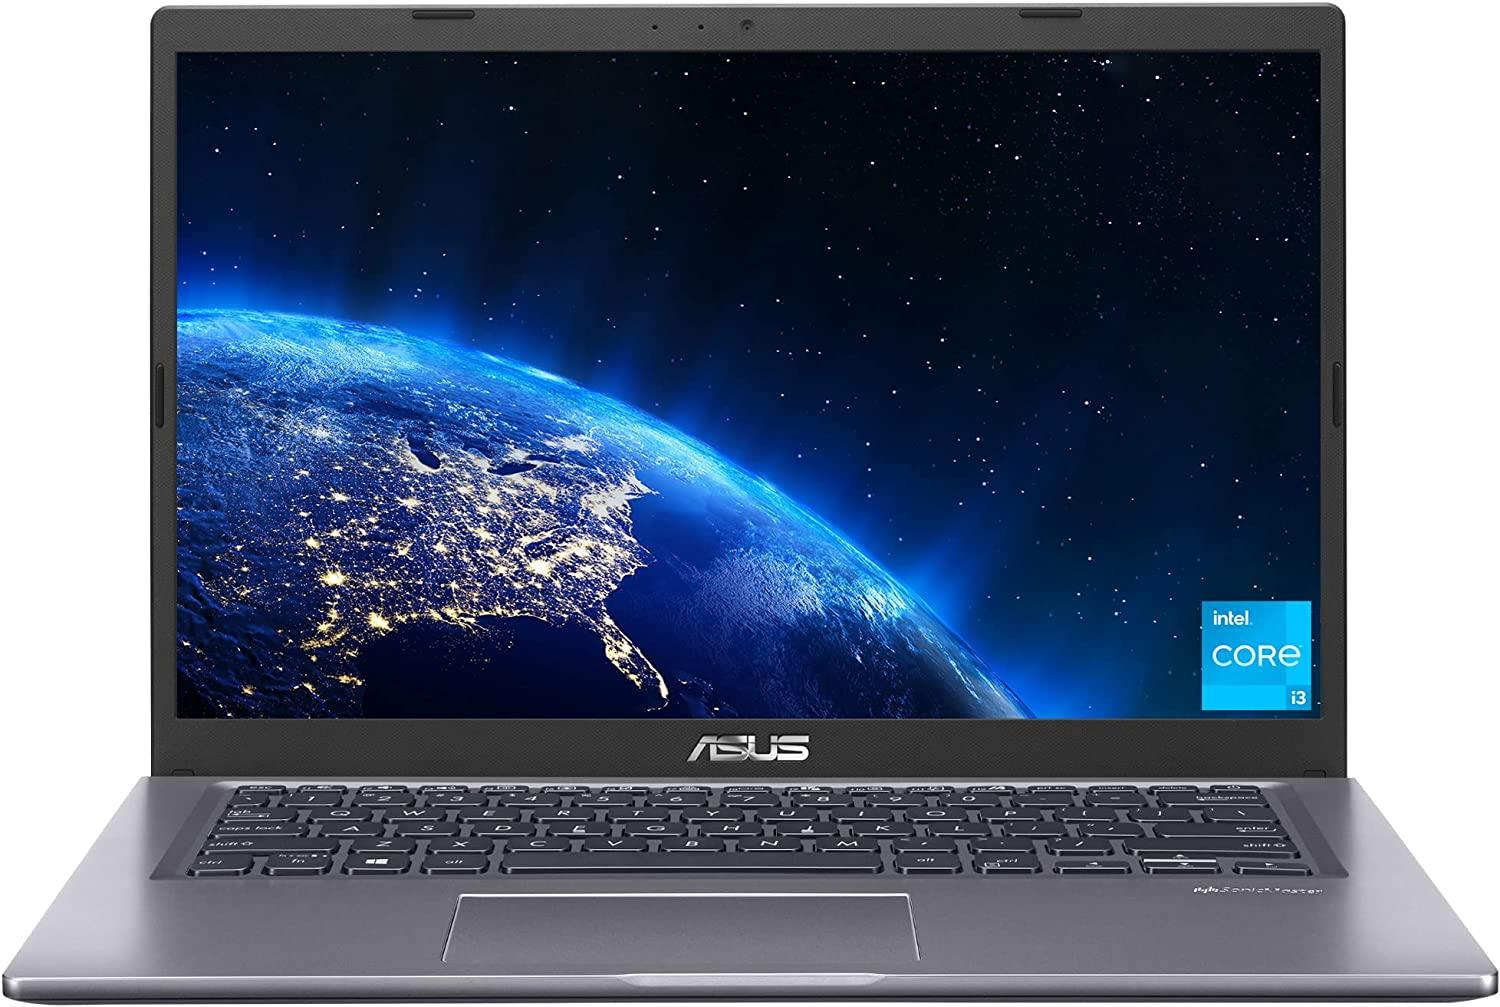 Asus VivoBook 14 i3 4GB 128GB Laptop Computer for $199.99 Shipped